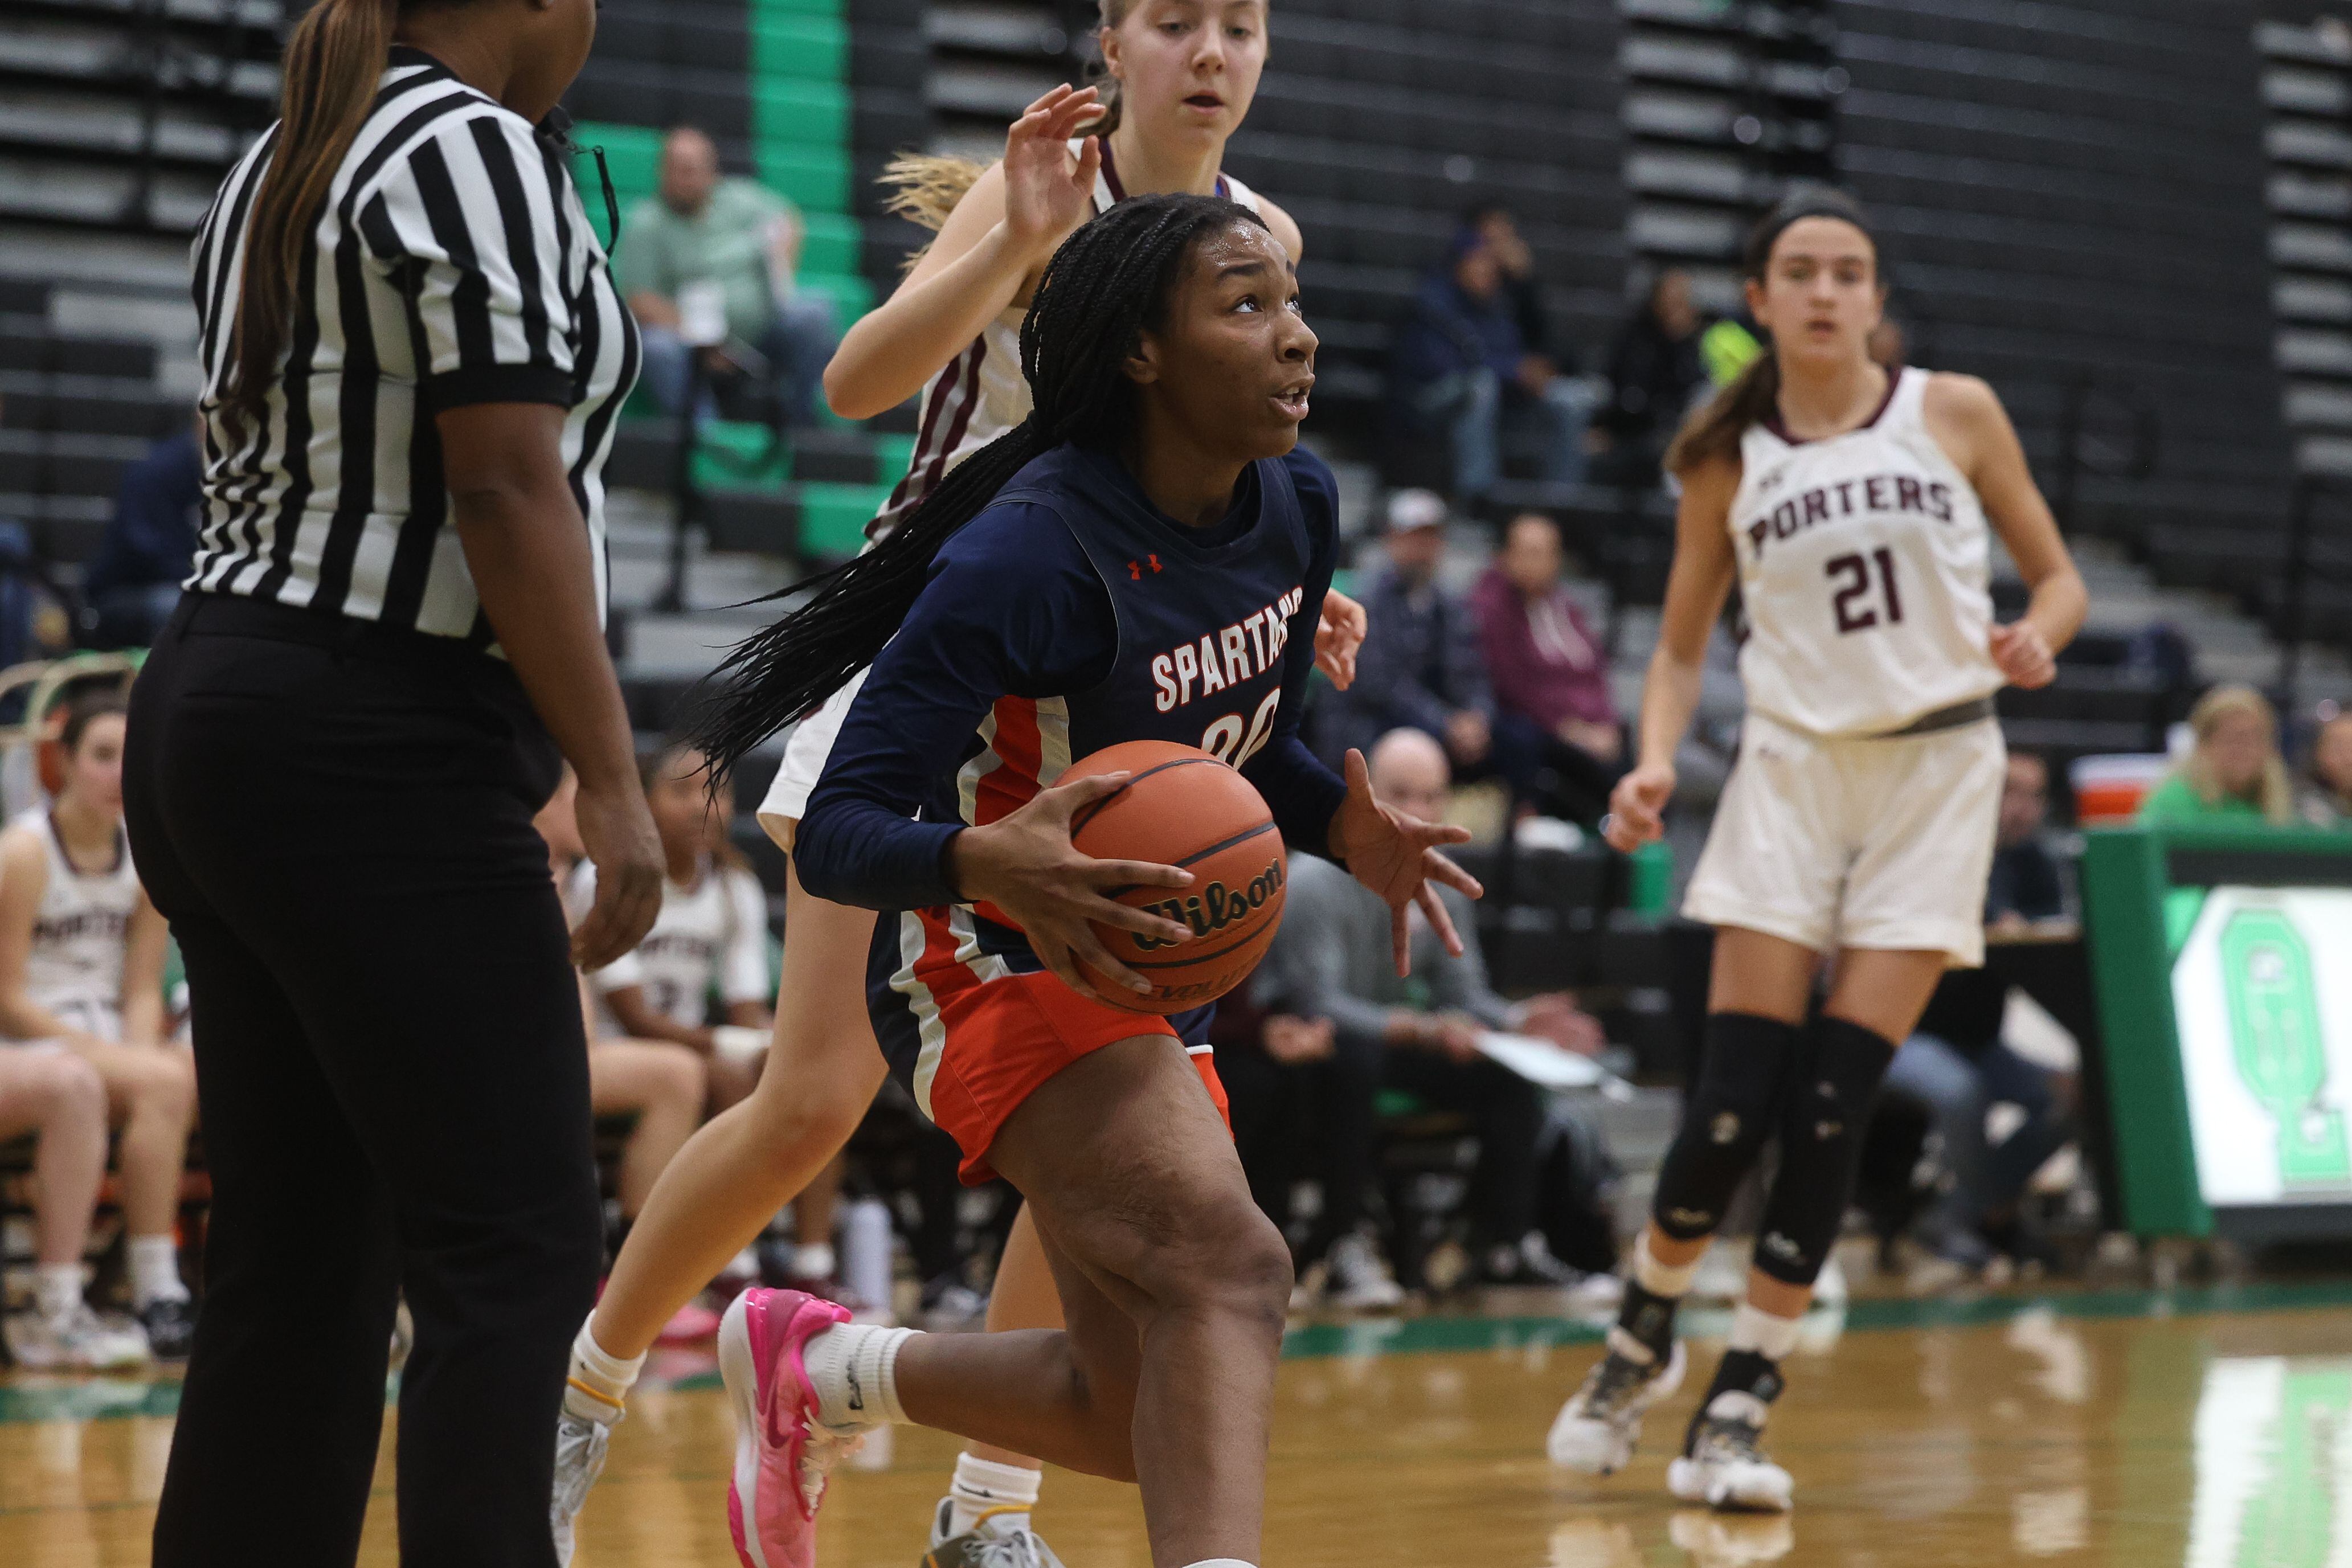 Romeoville’s Laila Houseworth drives the baseline for a shot against Lockport in the Oak Lawn Holiday Tournament championship on Saturday, Dec.16th in Oak Lawn.